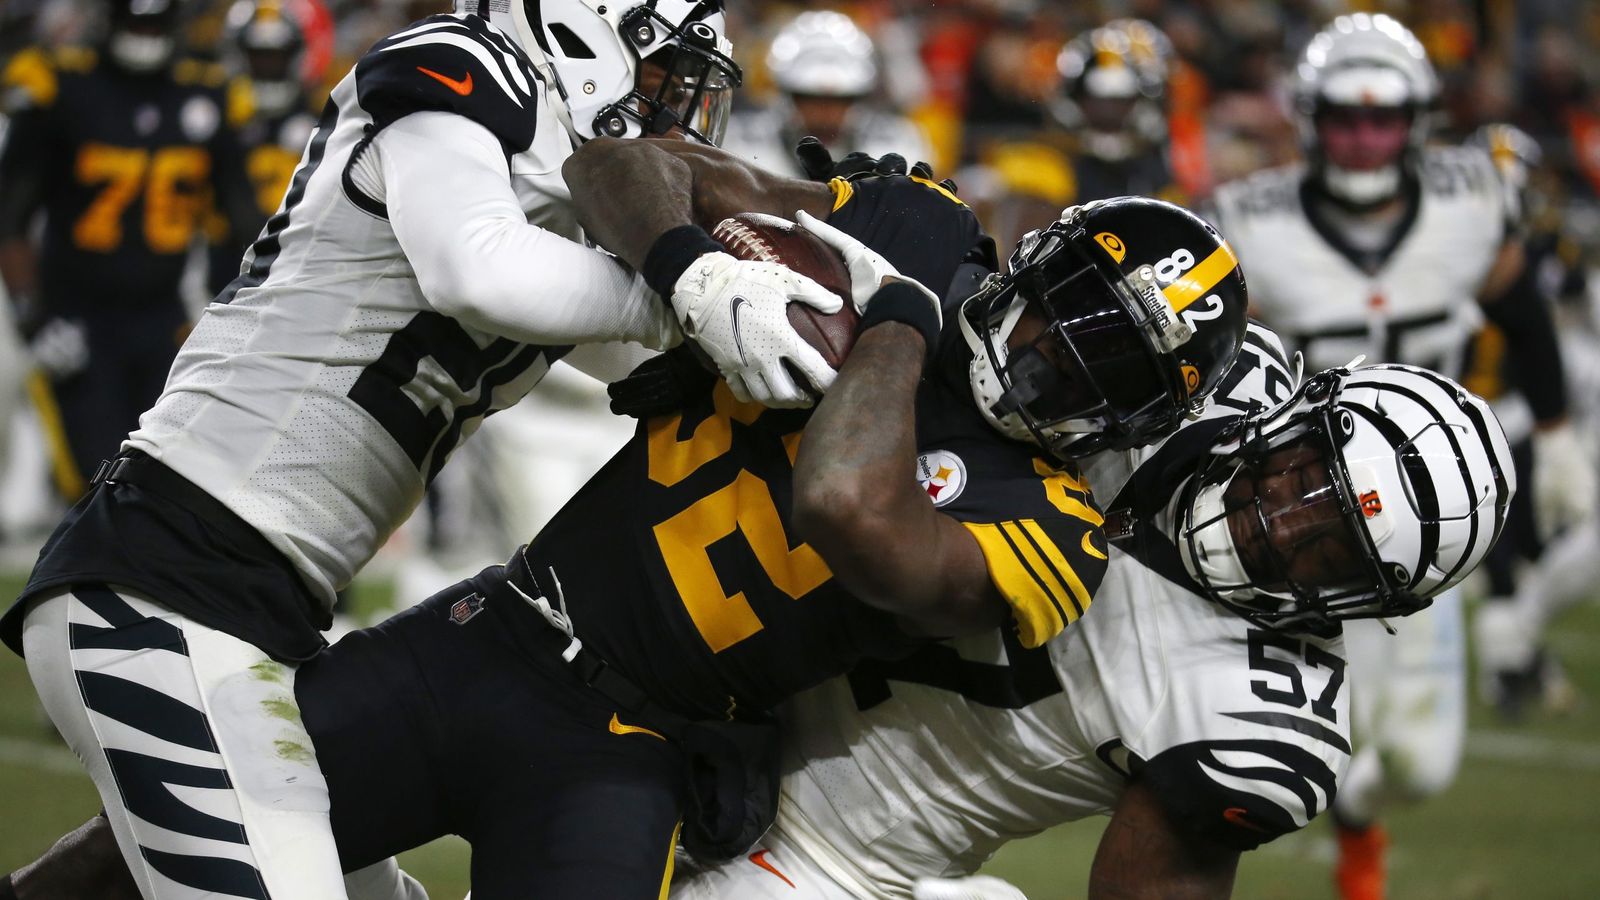 Steelers Offense 'Likes to Do the Same Plays Over and Over' According to  Bengals' Germaine Pratt After Week 11 Loss